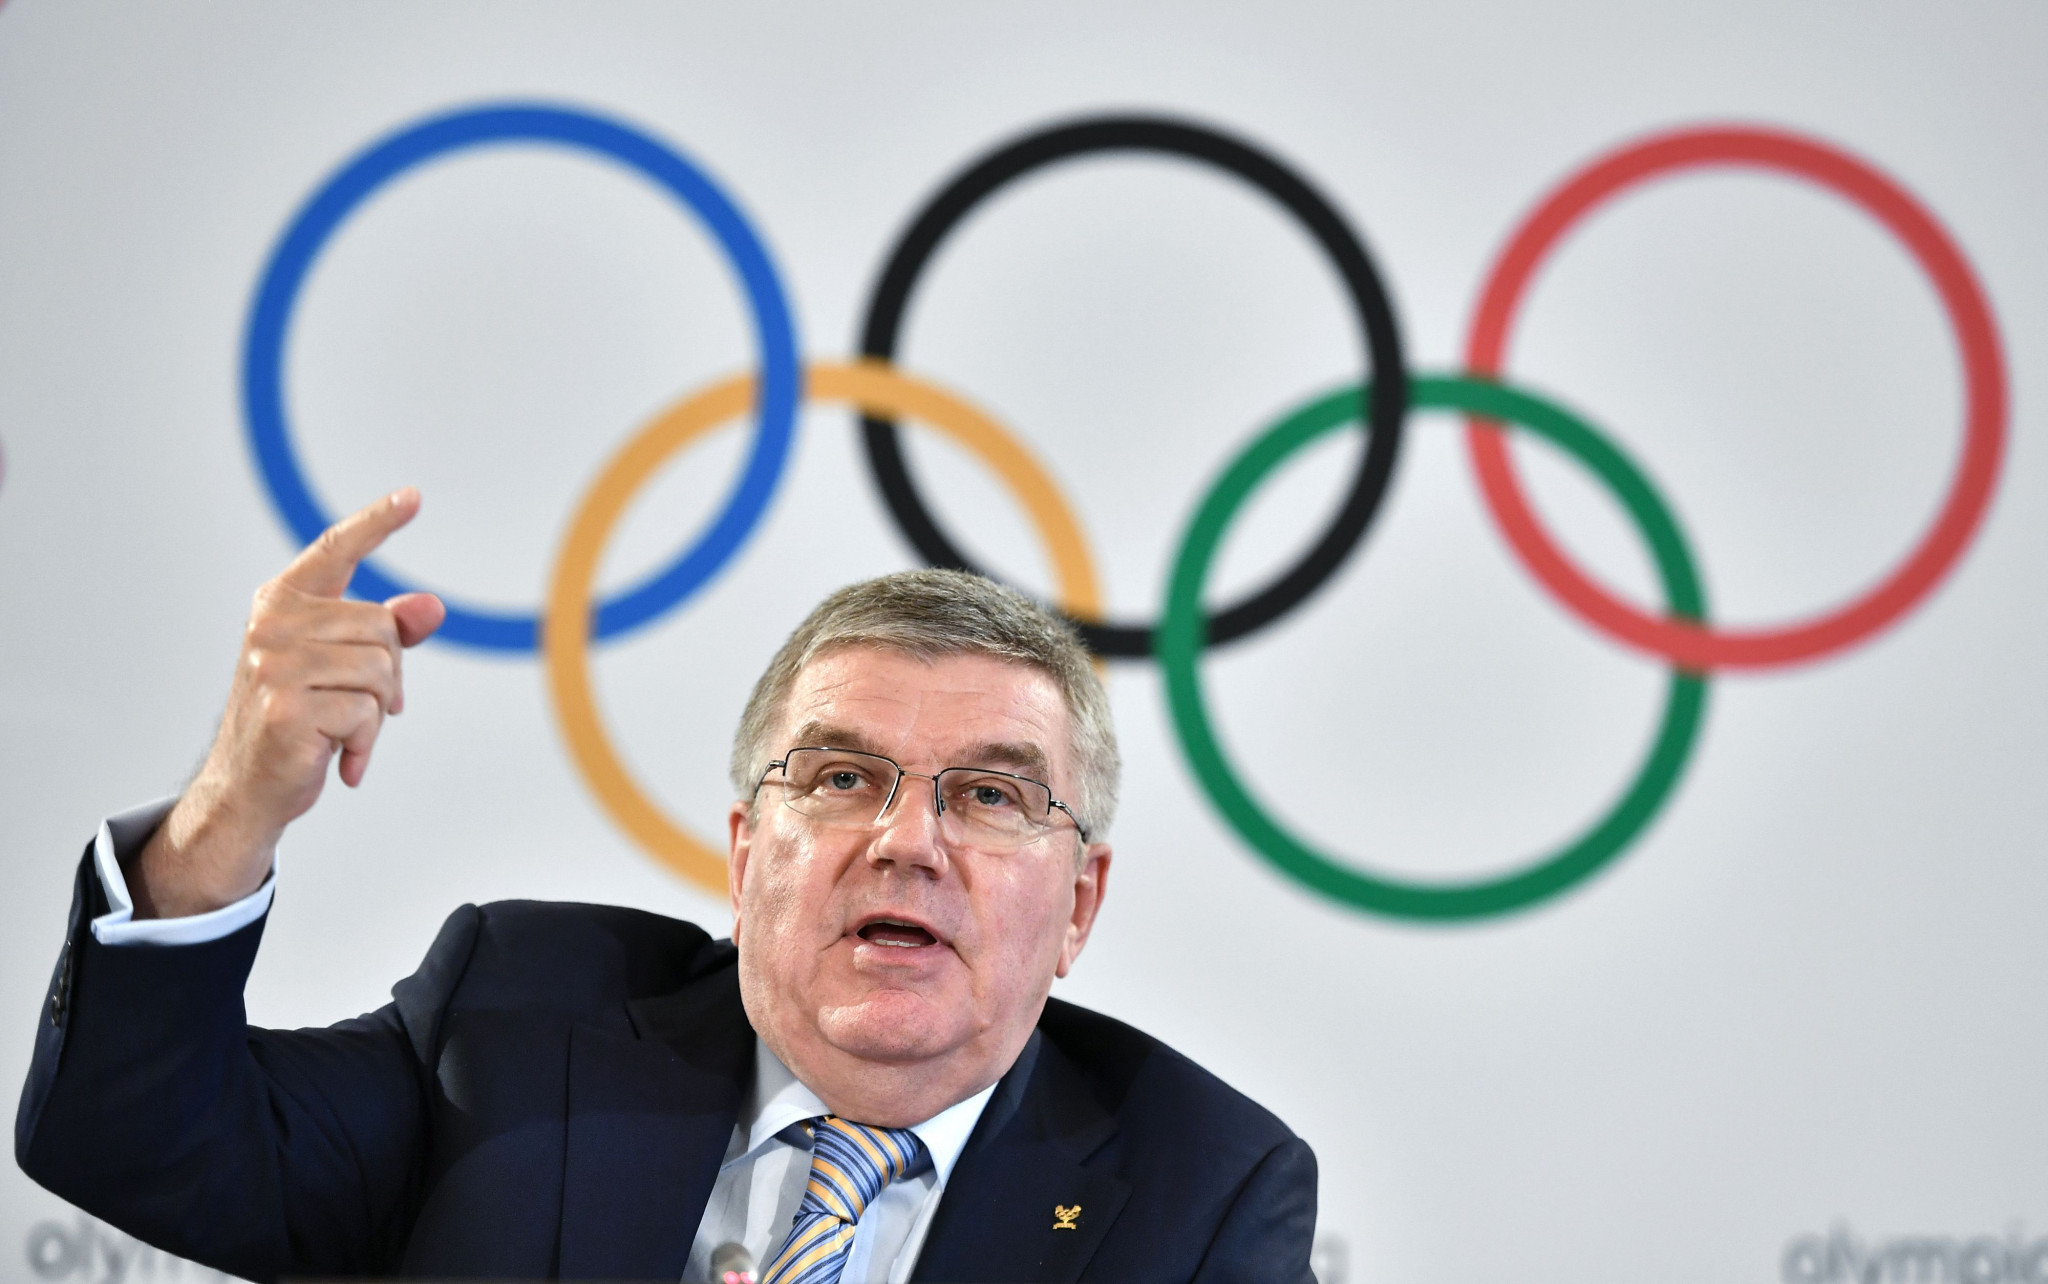 IOC approves idea to light Tokyo 2020 Olympic flame on ninth anniversary of 2011 earthquake